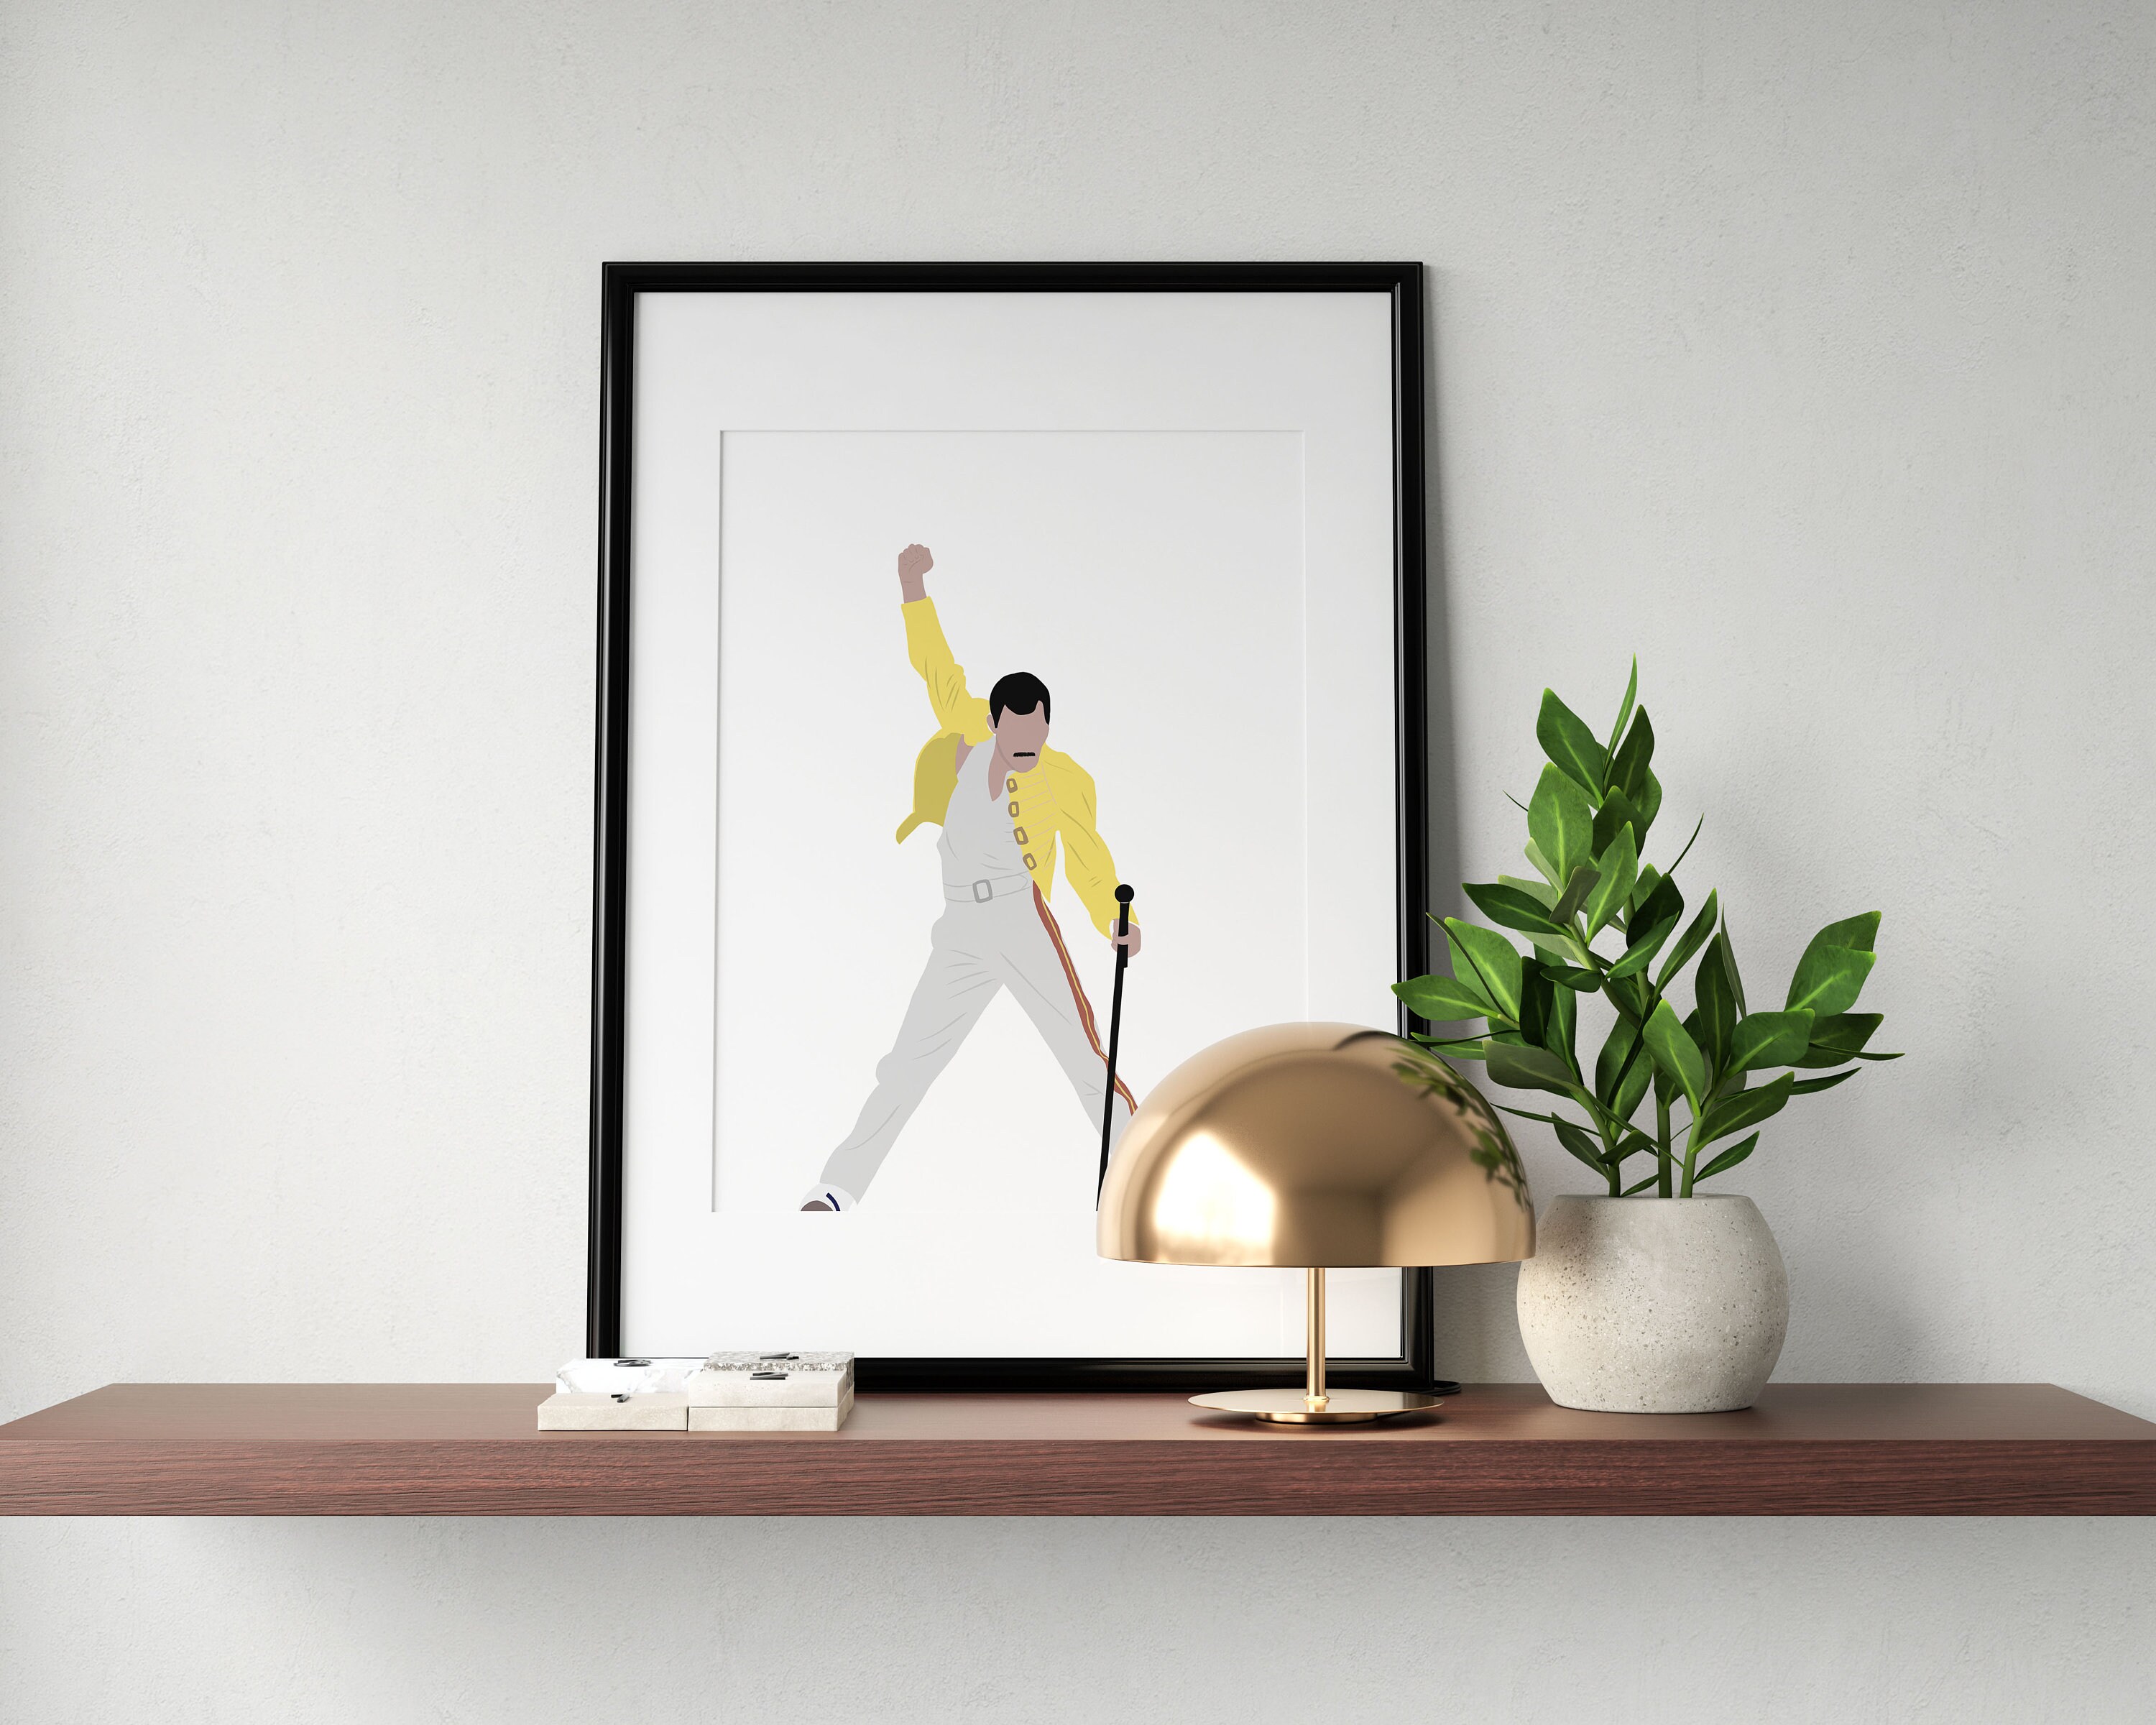 Discover Freddy Mercury Poster, Queen Band Decor